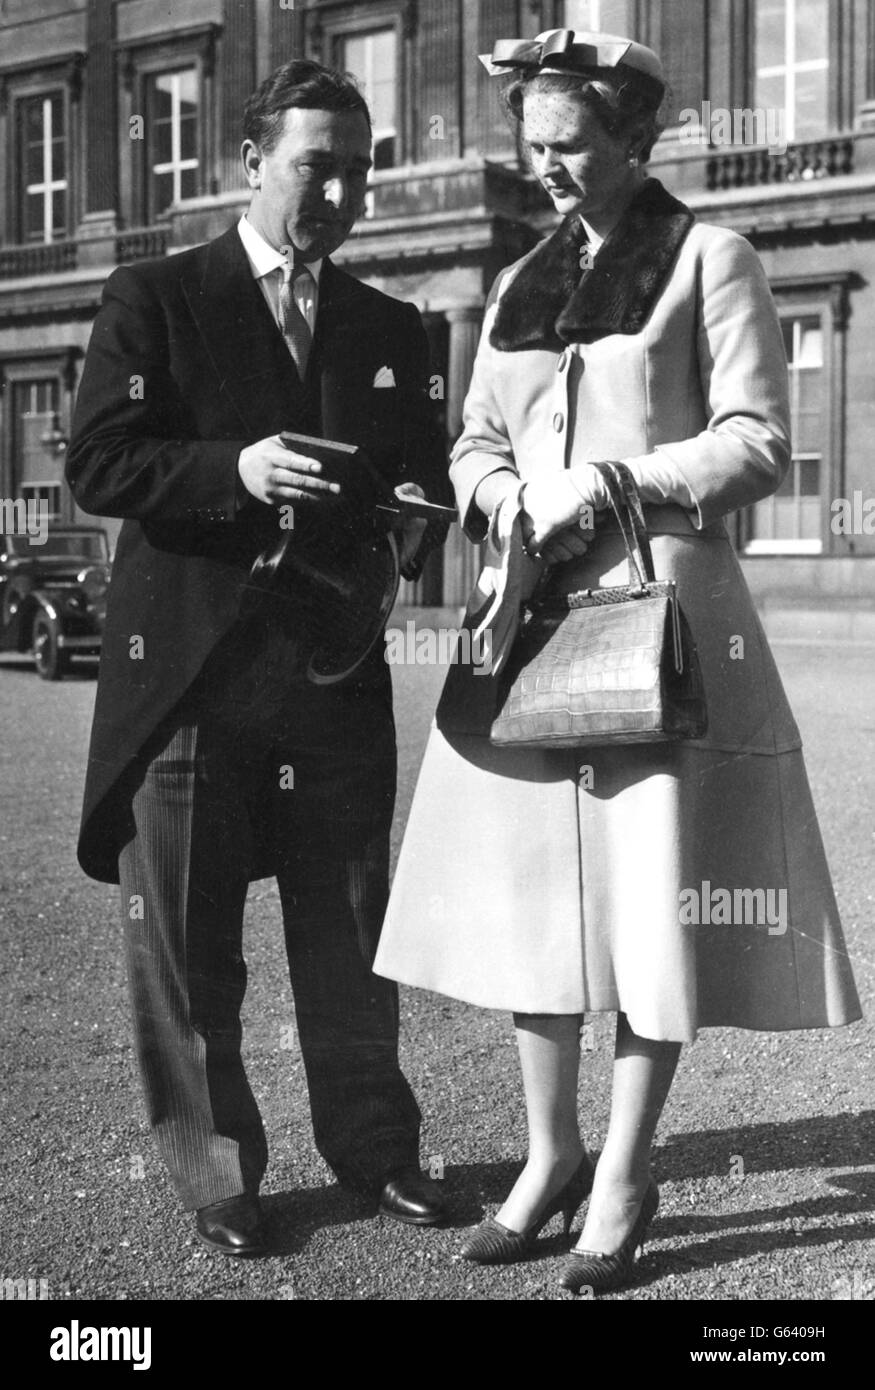 Cricketer Denis Compton shows his wife Valerie the insignia of a Commander of the Order of the British Empire (CBE), which he had just received from the Queen, as they left Buckingham Palace after the Investiture. Stock Photo